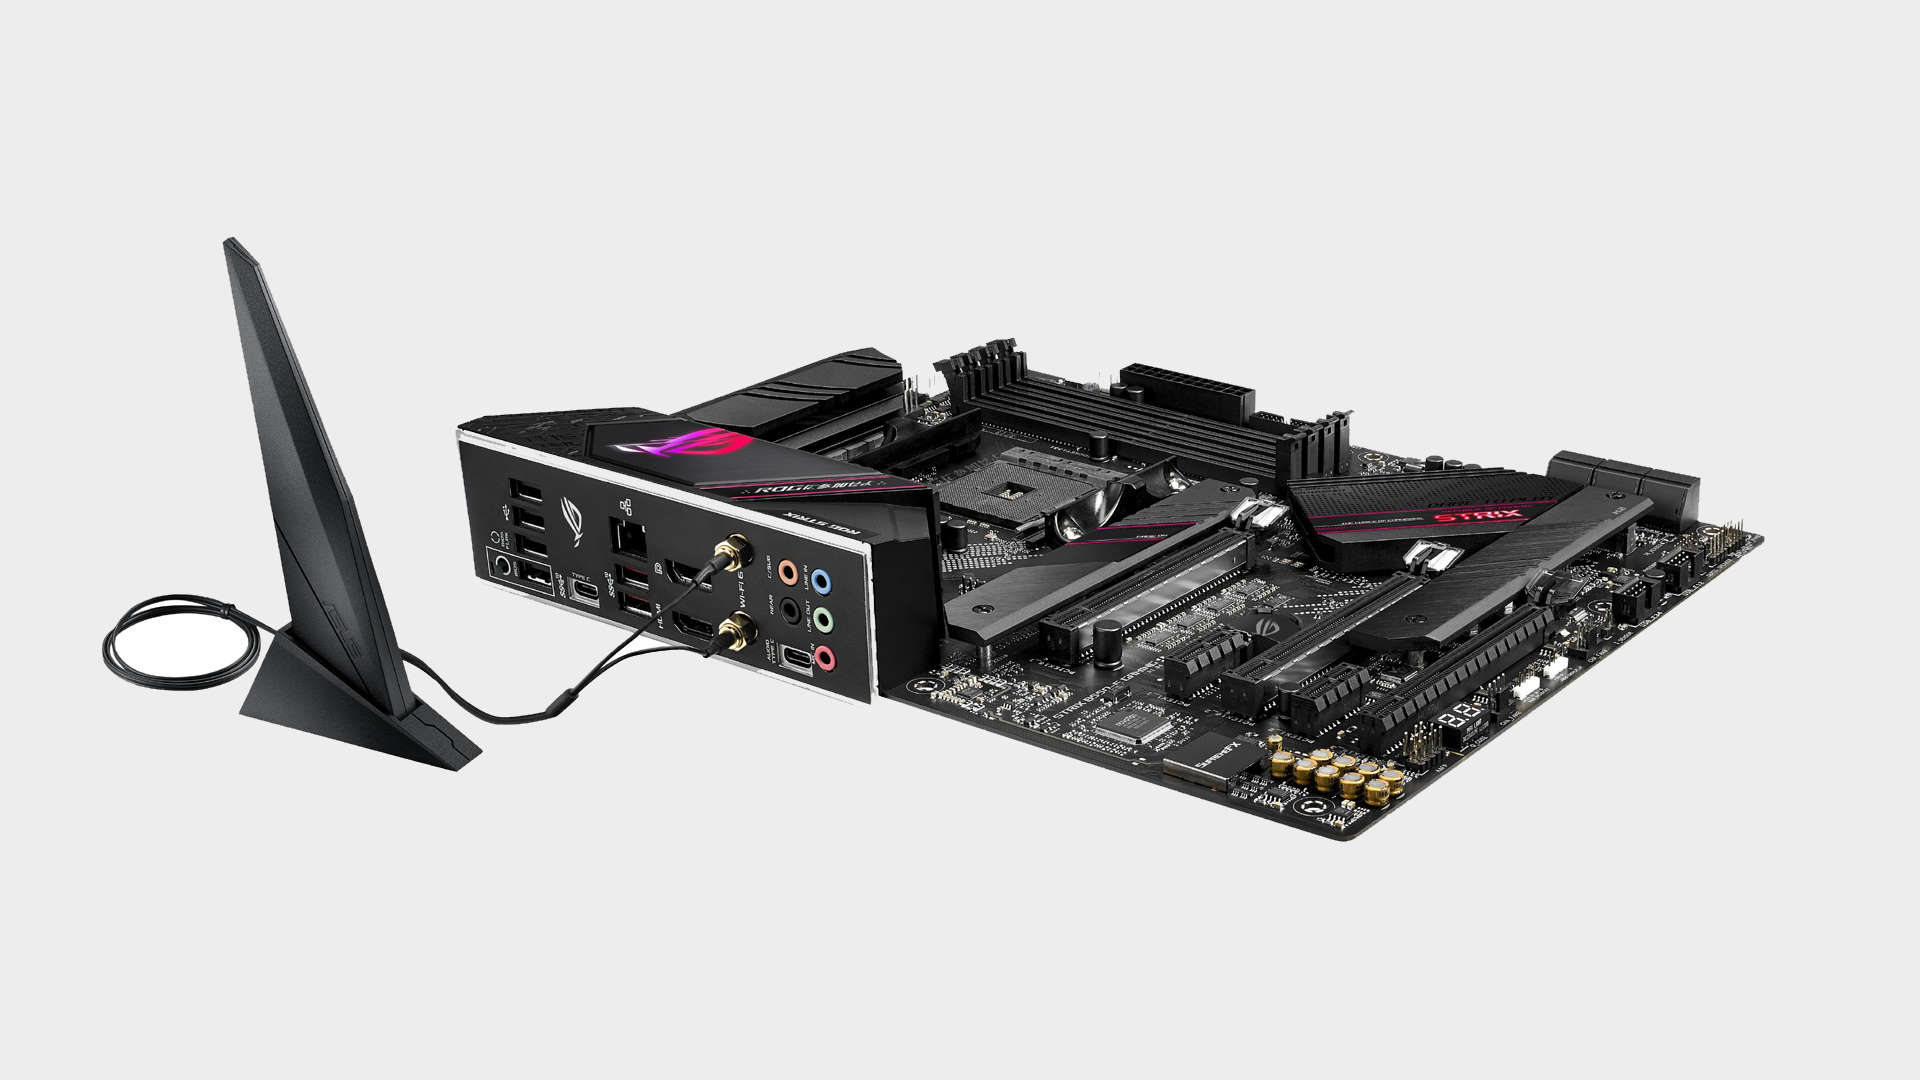 Image of the Asus ROG Strix B550-E Gaming motherboard pictured lying flat on a grey background.